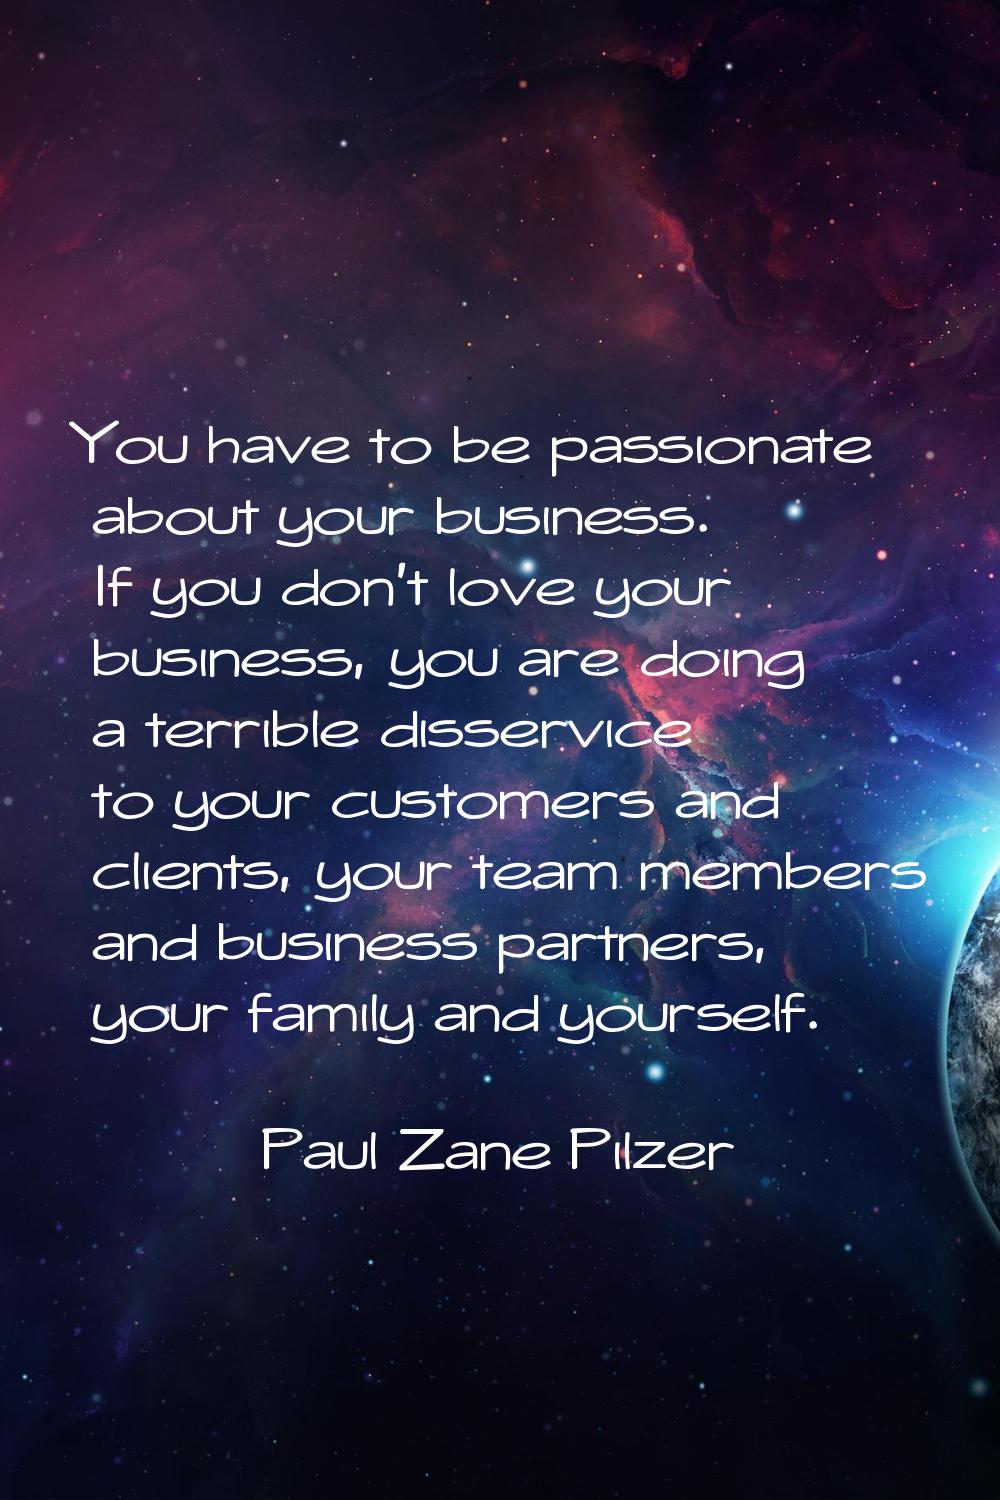 You have to be passionate about your business. If you don't love your business, you are doing a ter